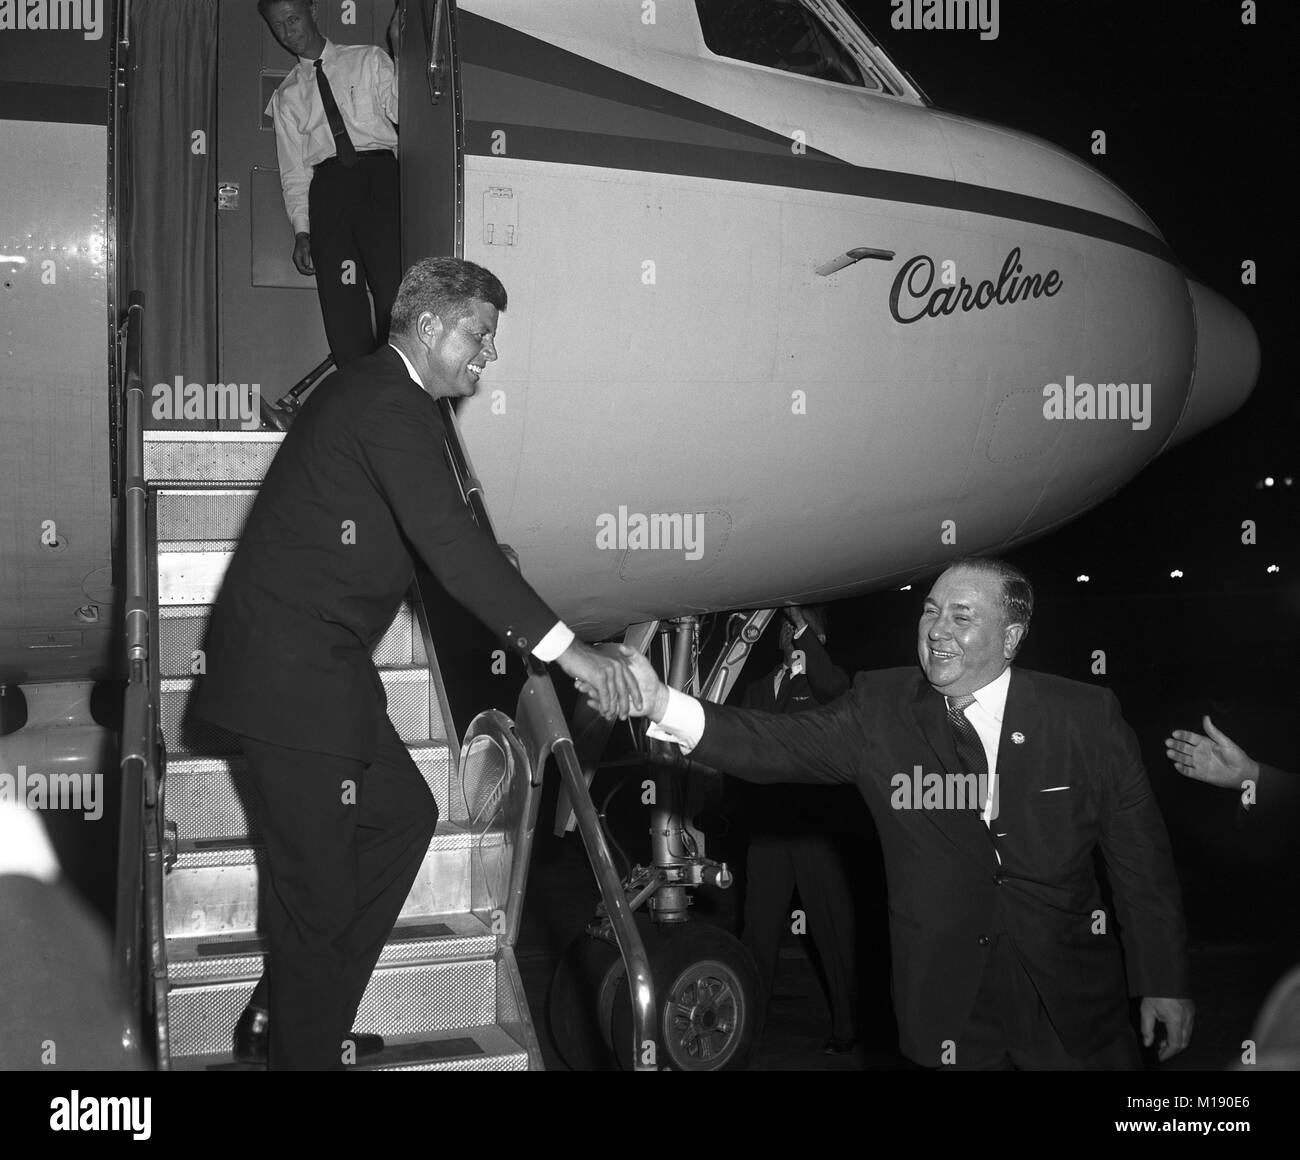 Senator John F. Kennedy leaving Chicago O’Hare airfield, says goodbye to Mayor Richard J. Daley, September 26, 1960. The Caroline was a 1948 Convair CV-240 aircraft purchased by Joseph Kennedy from American Airlines and was the first private aircraft used in a U.S. presidential campaign. Stock Photo